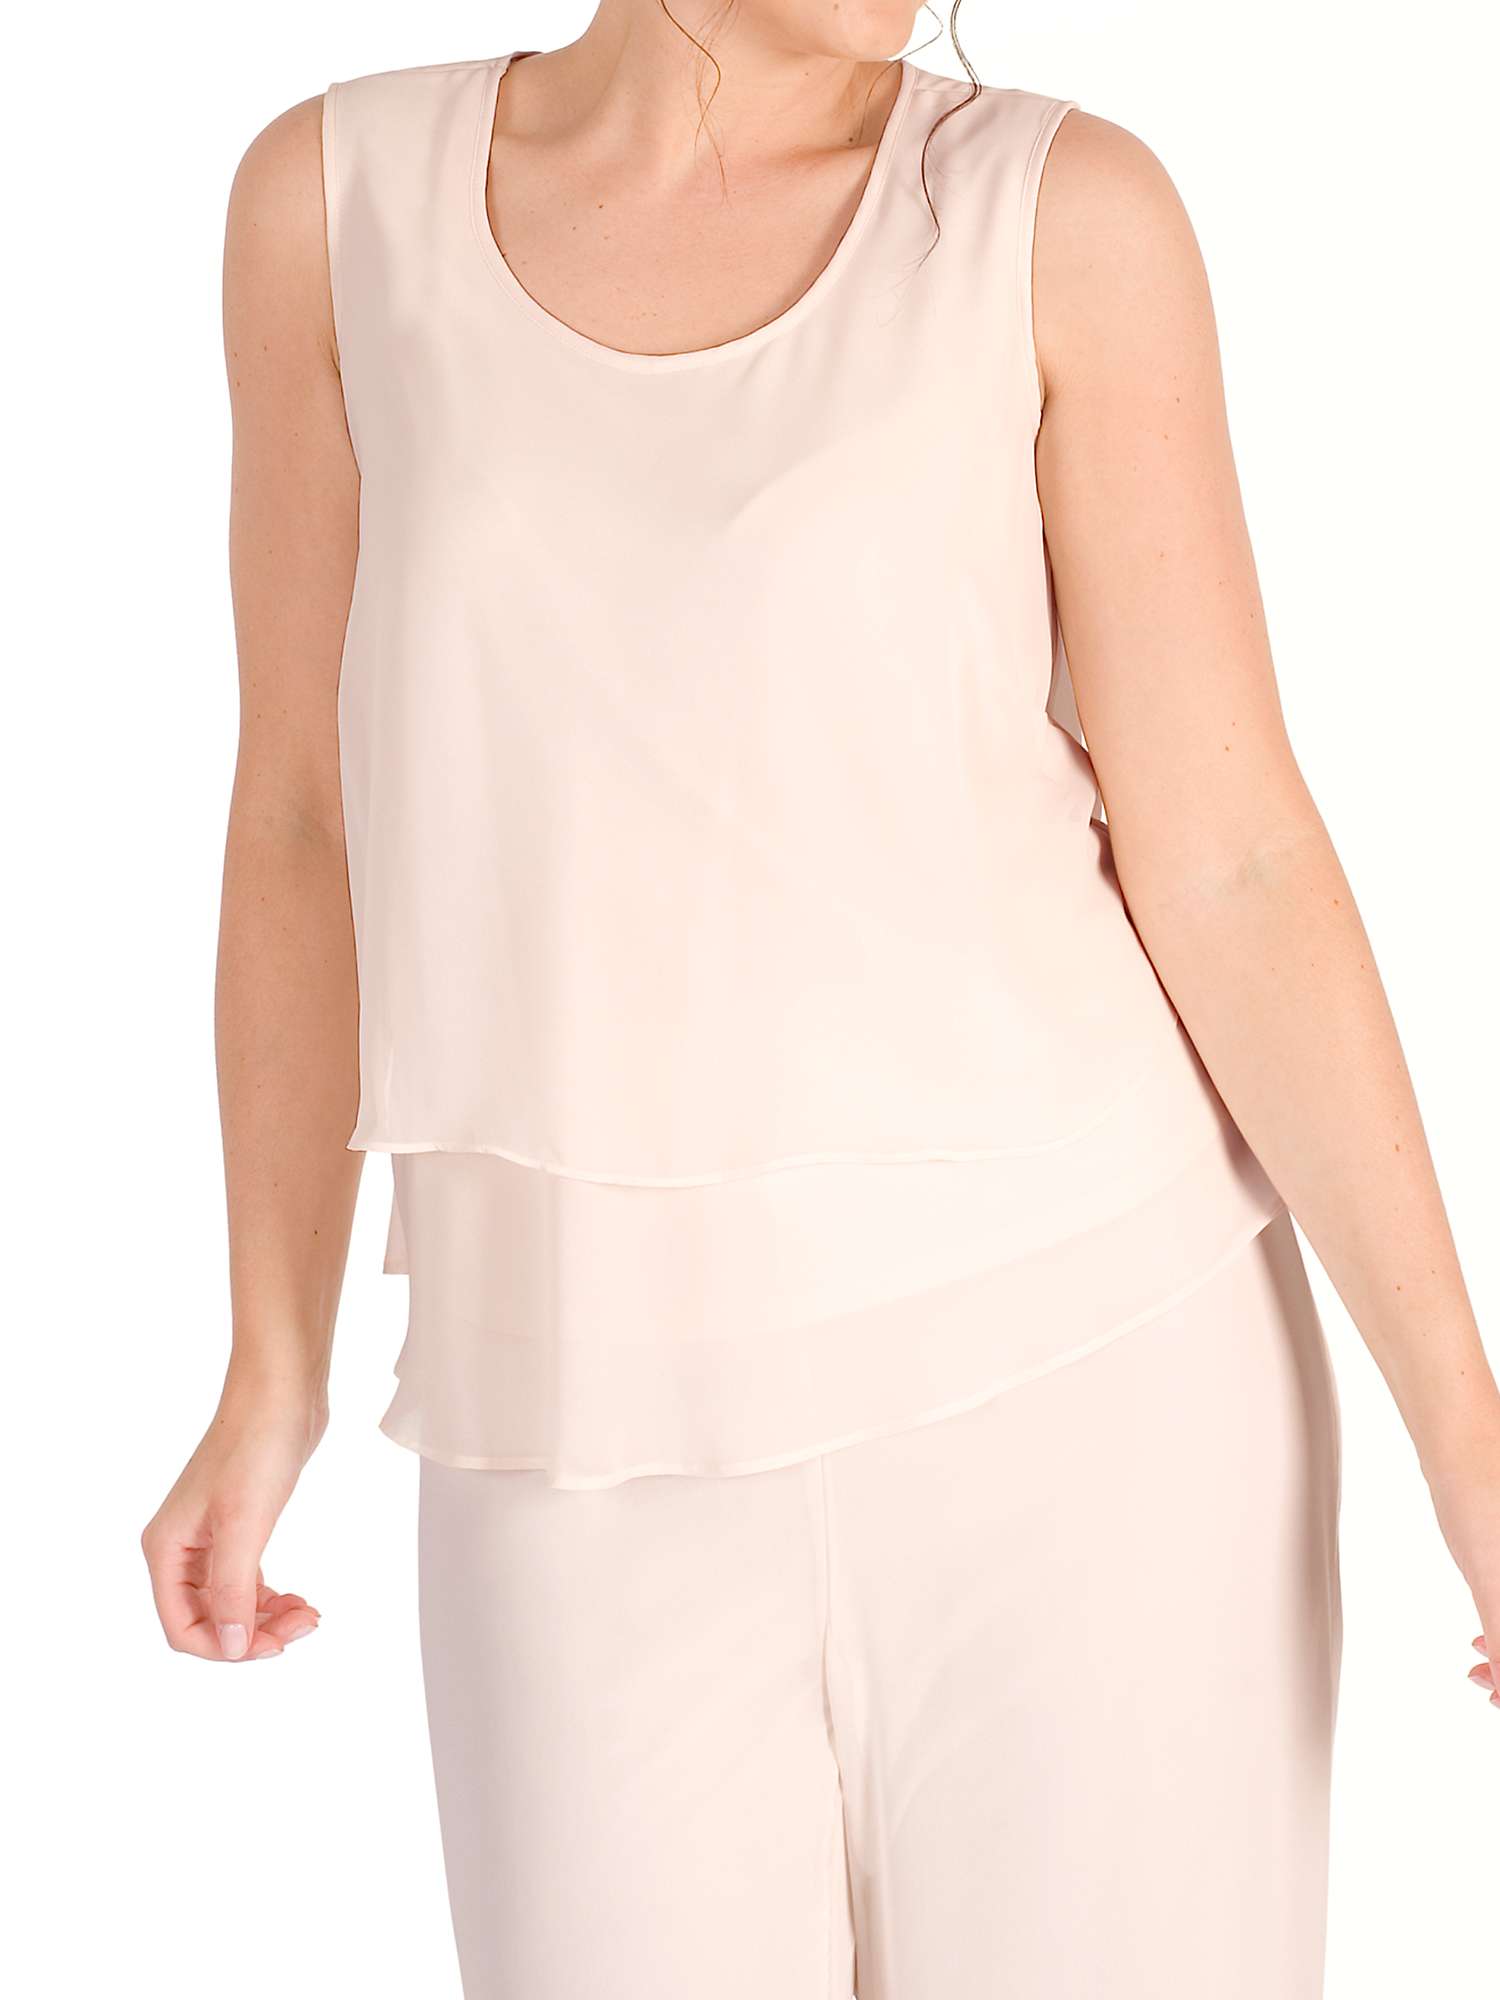 Buy Chesca Wrap Back Layered Chiffon Top Online at johnlewis.com